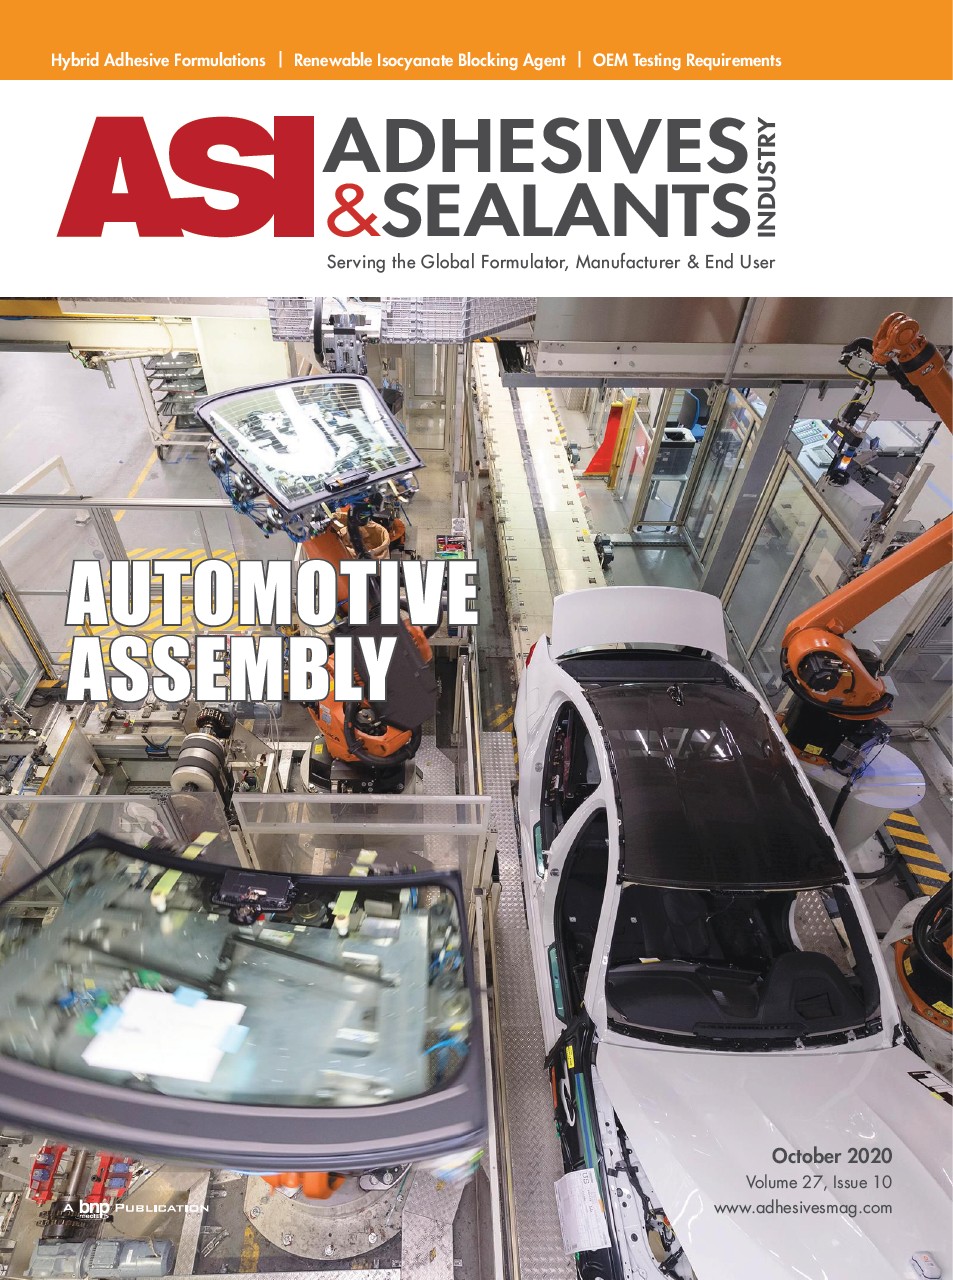 Adhesives in Automotive Assembly Article ASI October 2020